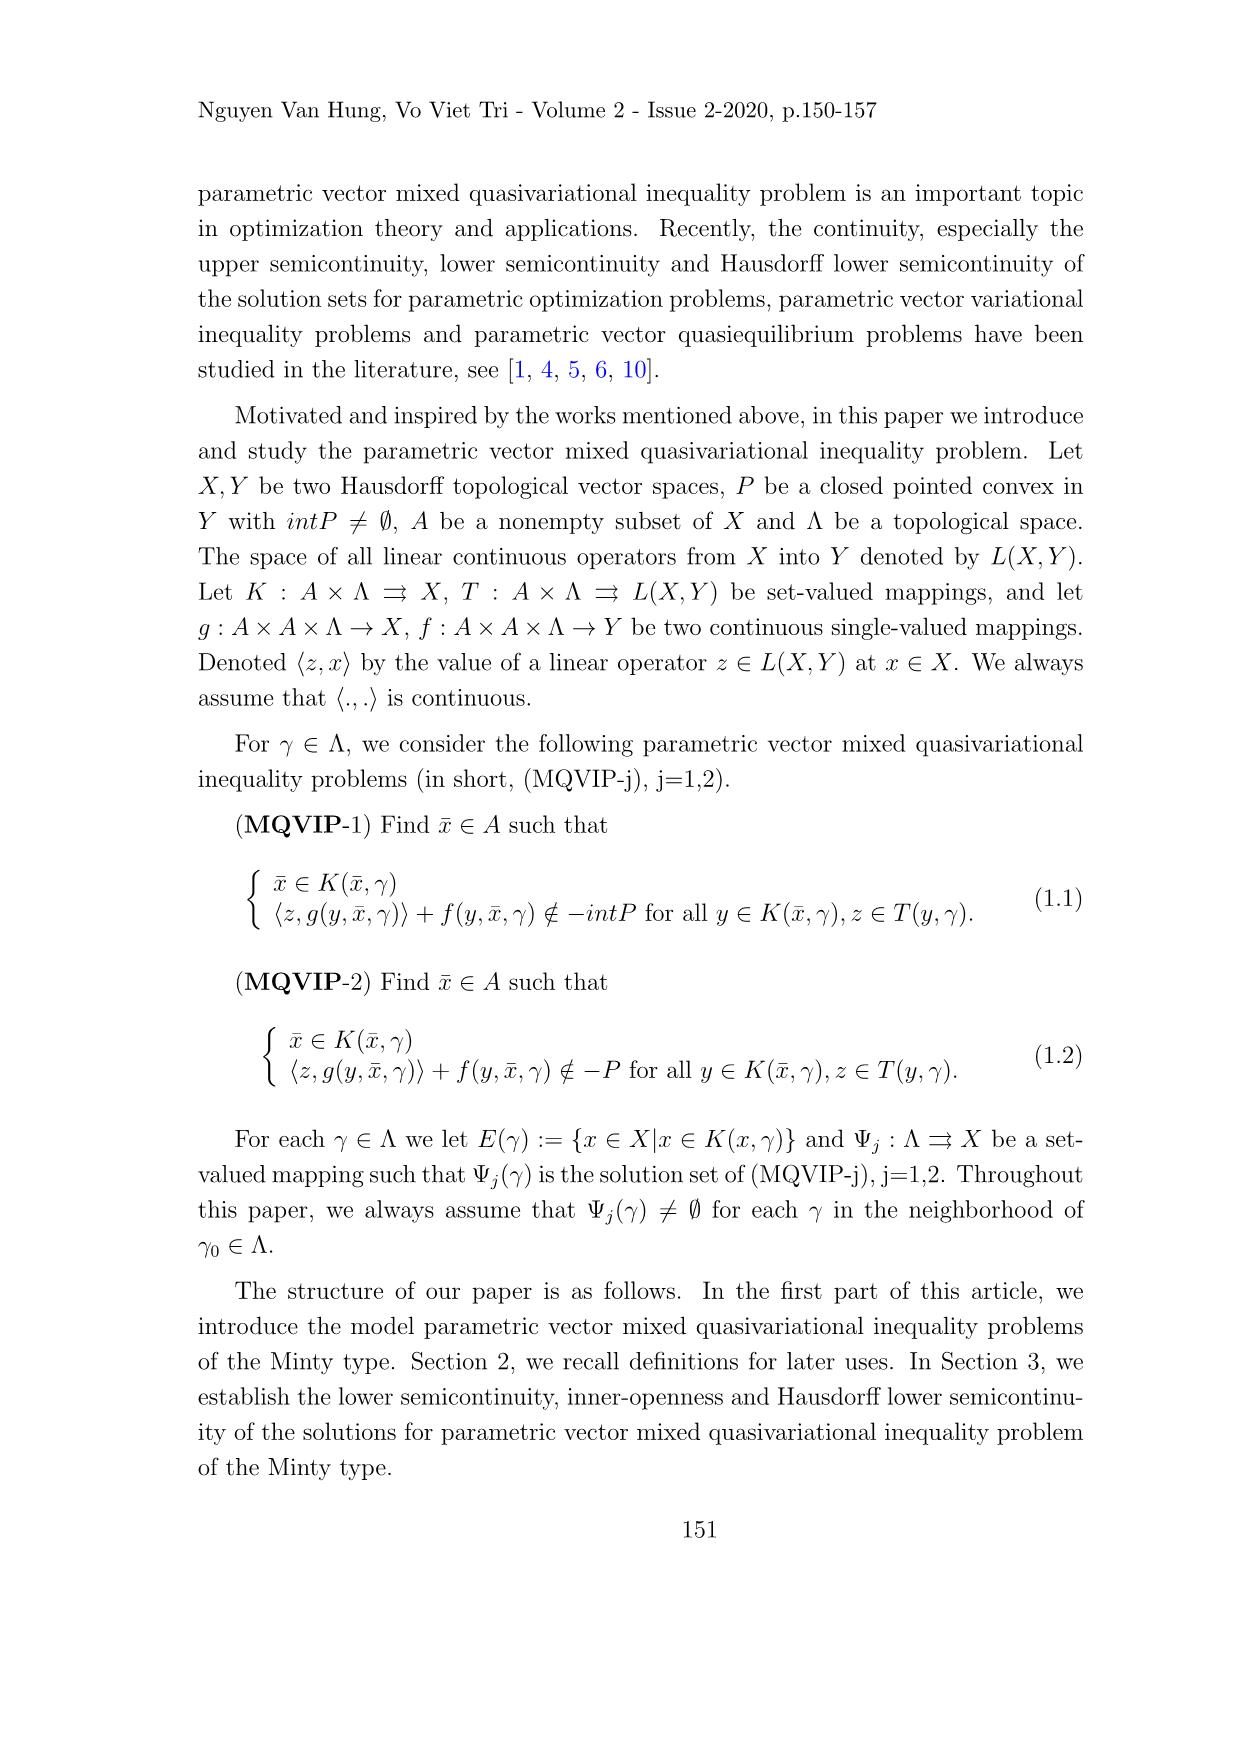 On the lower semicontinuity of the solution mapping for parametric vector mixed quasivariational inequality problem of the Minty type trang 2